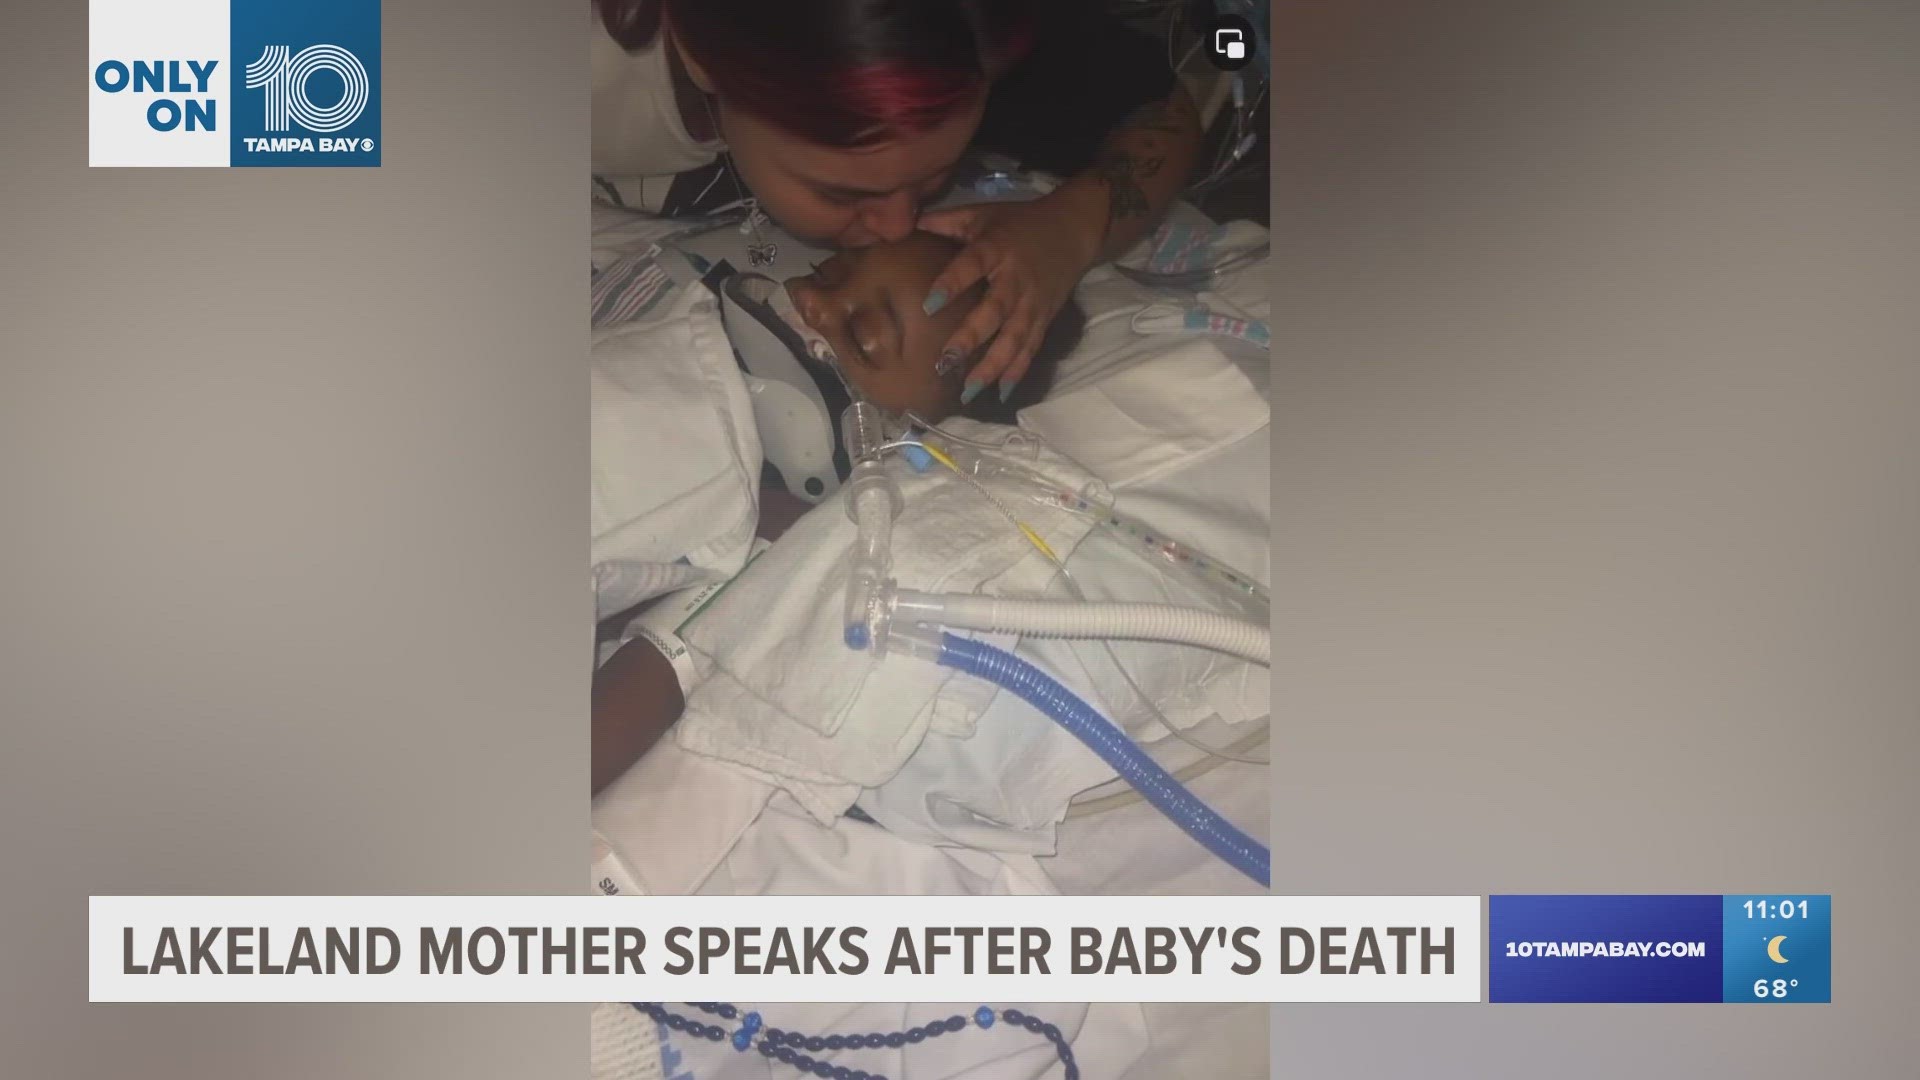 The 22-year-old mother was at work when her son was hurt.